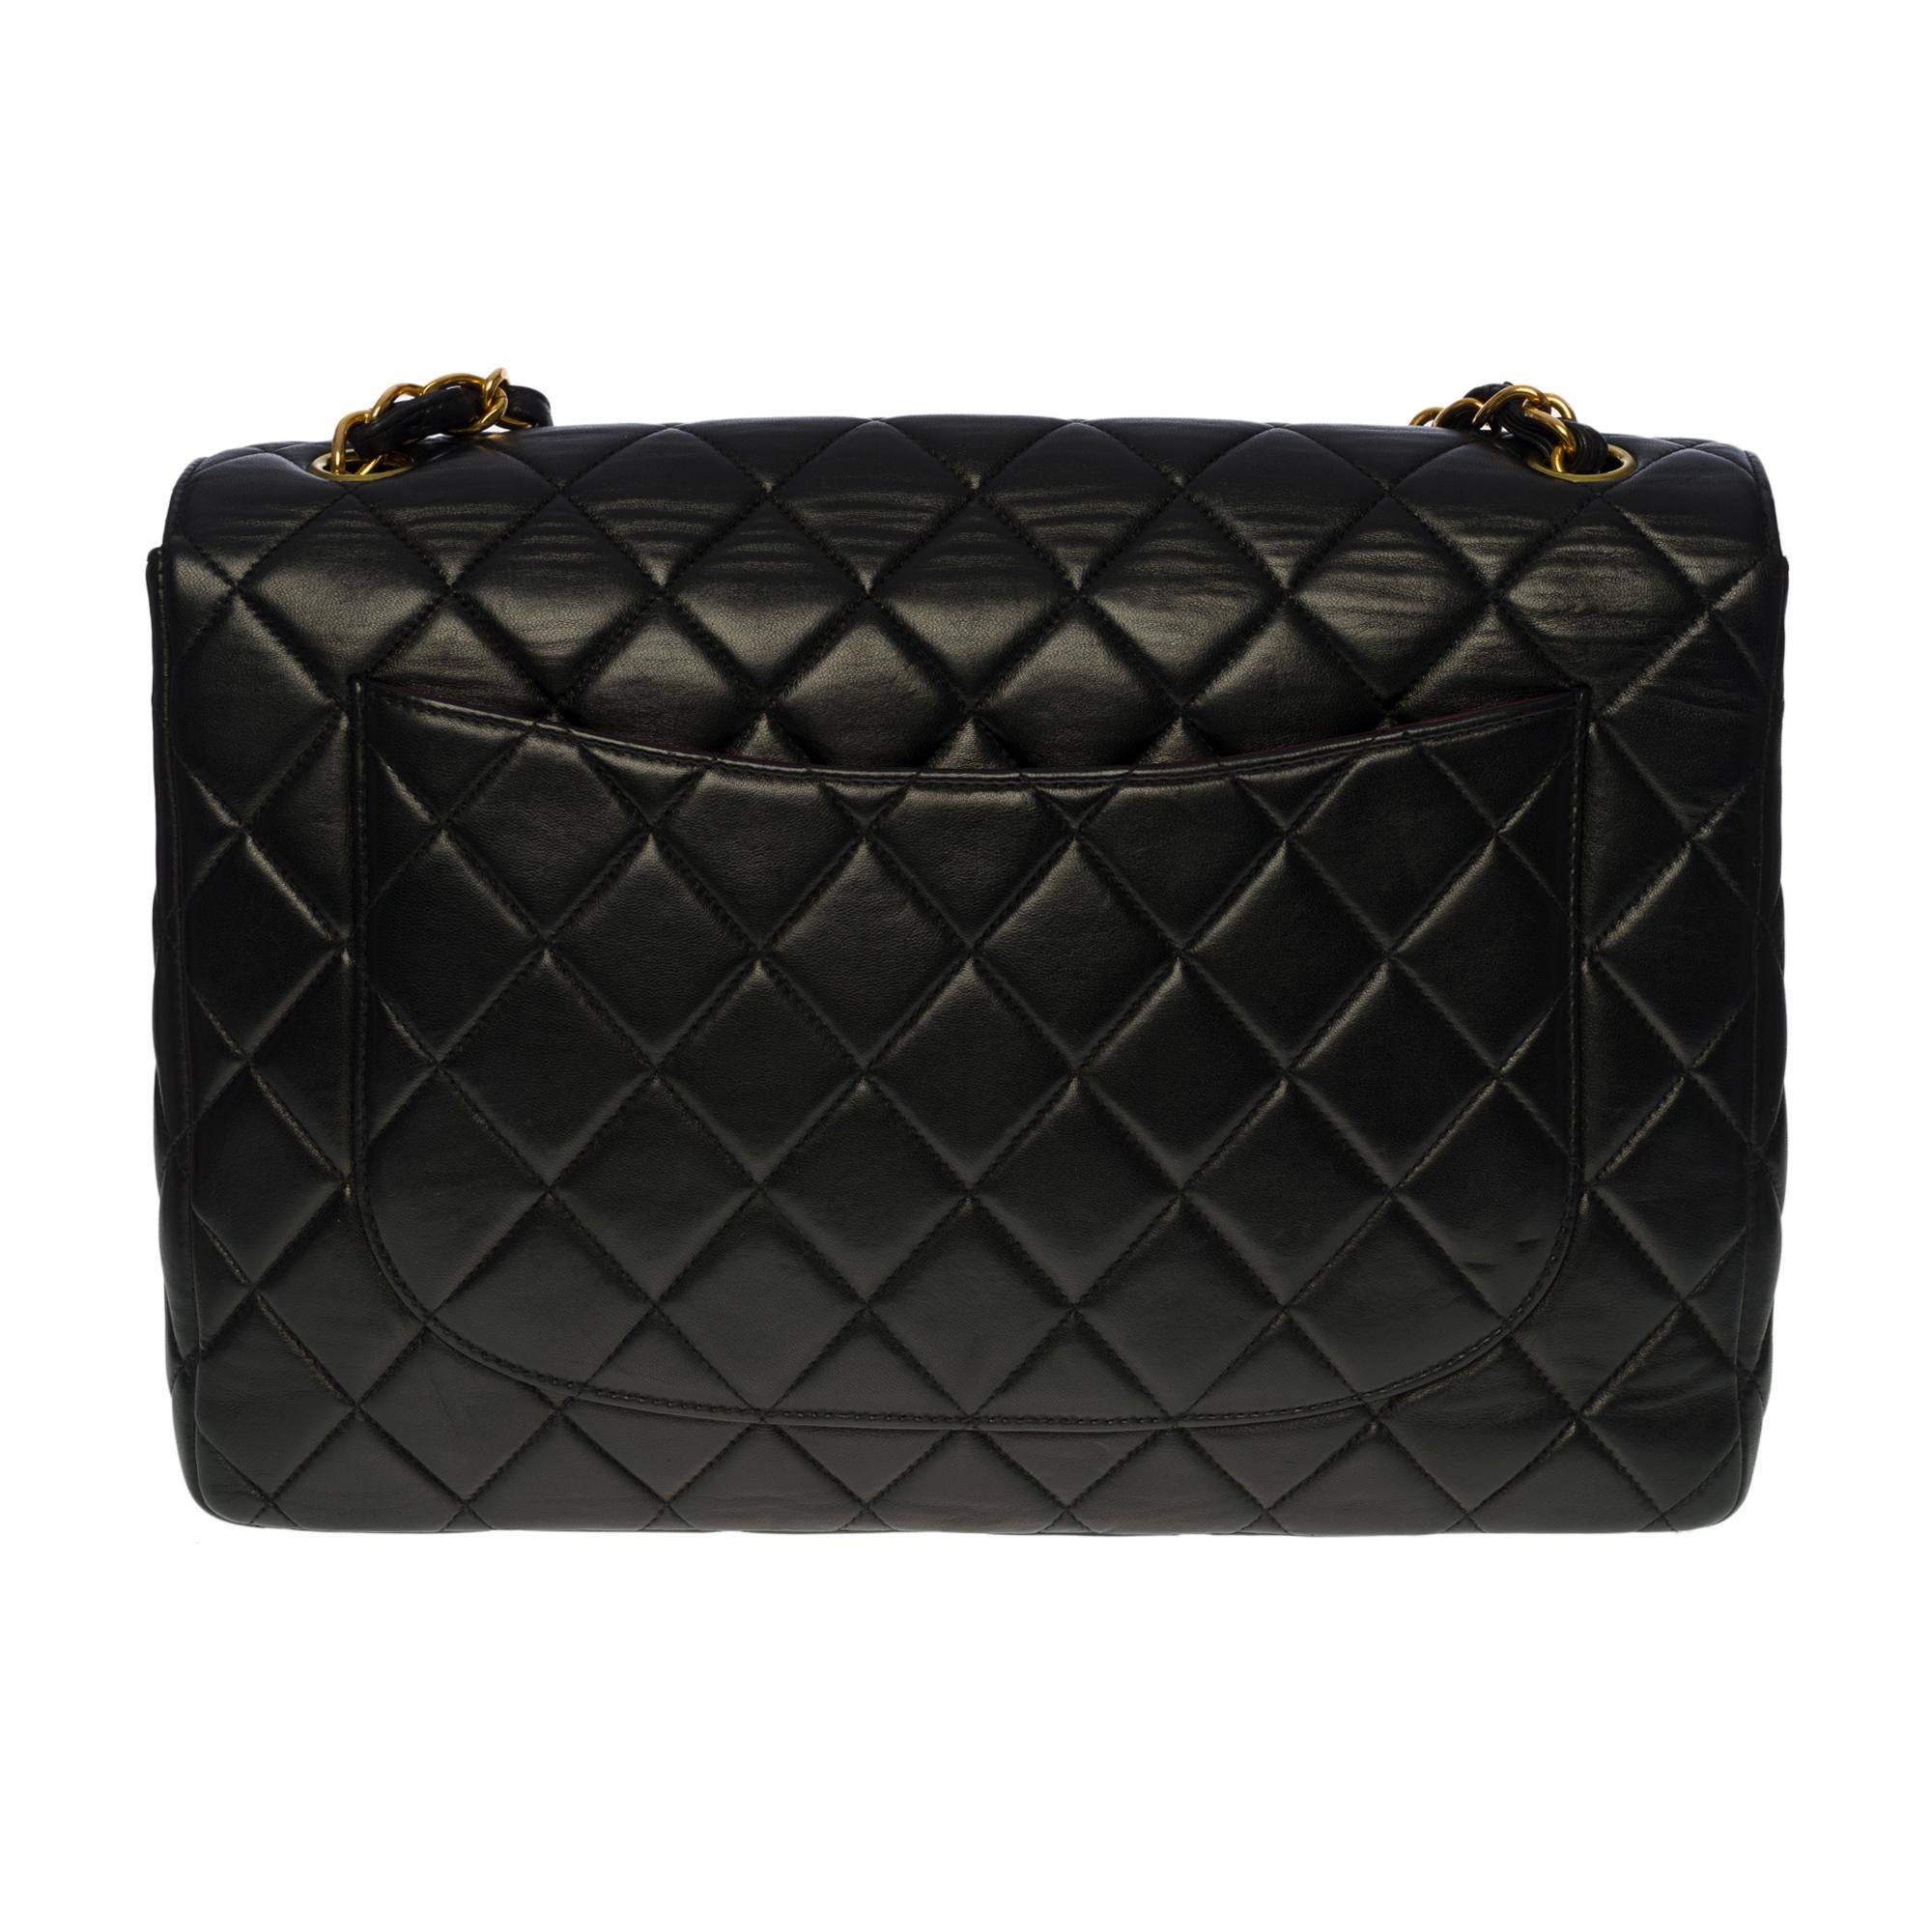 Majestic Chanel Timeless/Classic Jumbo flap bag in black quilted lambskin leather, gold-tone hardware, a gold-tone chain handle interlaced with black leather for a shoulder and shoulder strap

Backpack pocket
Flap closure, gold CC logo clasp
Single